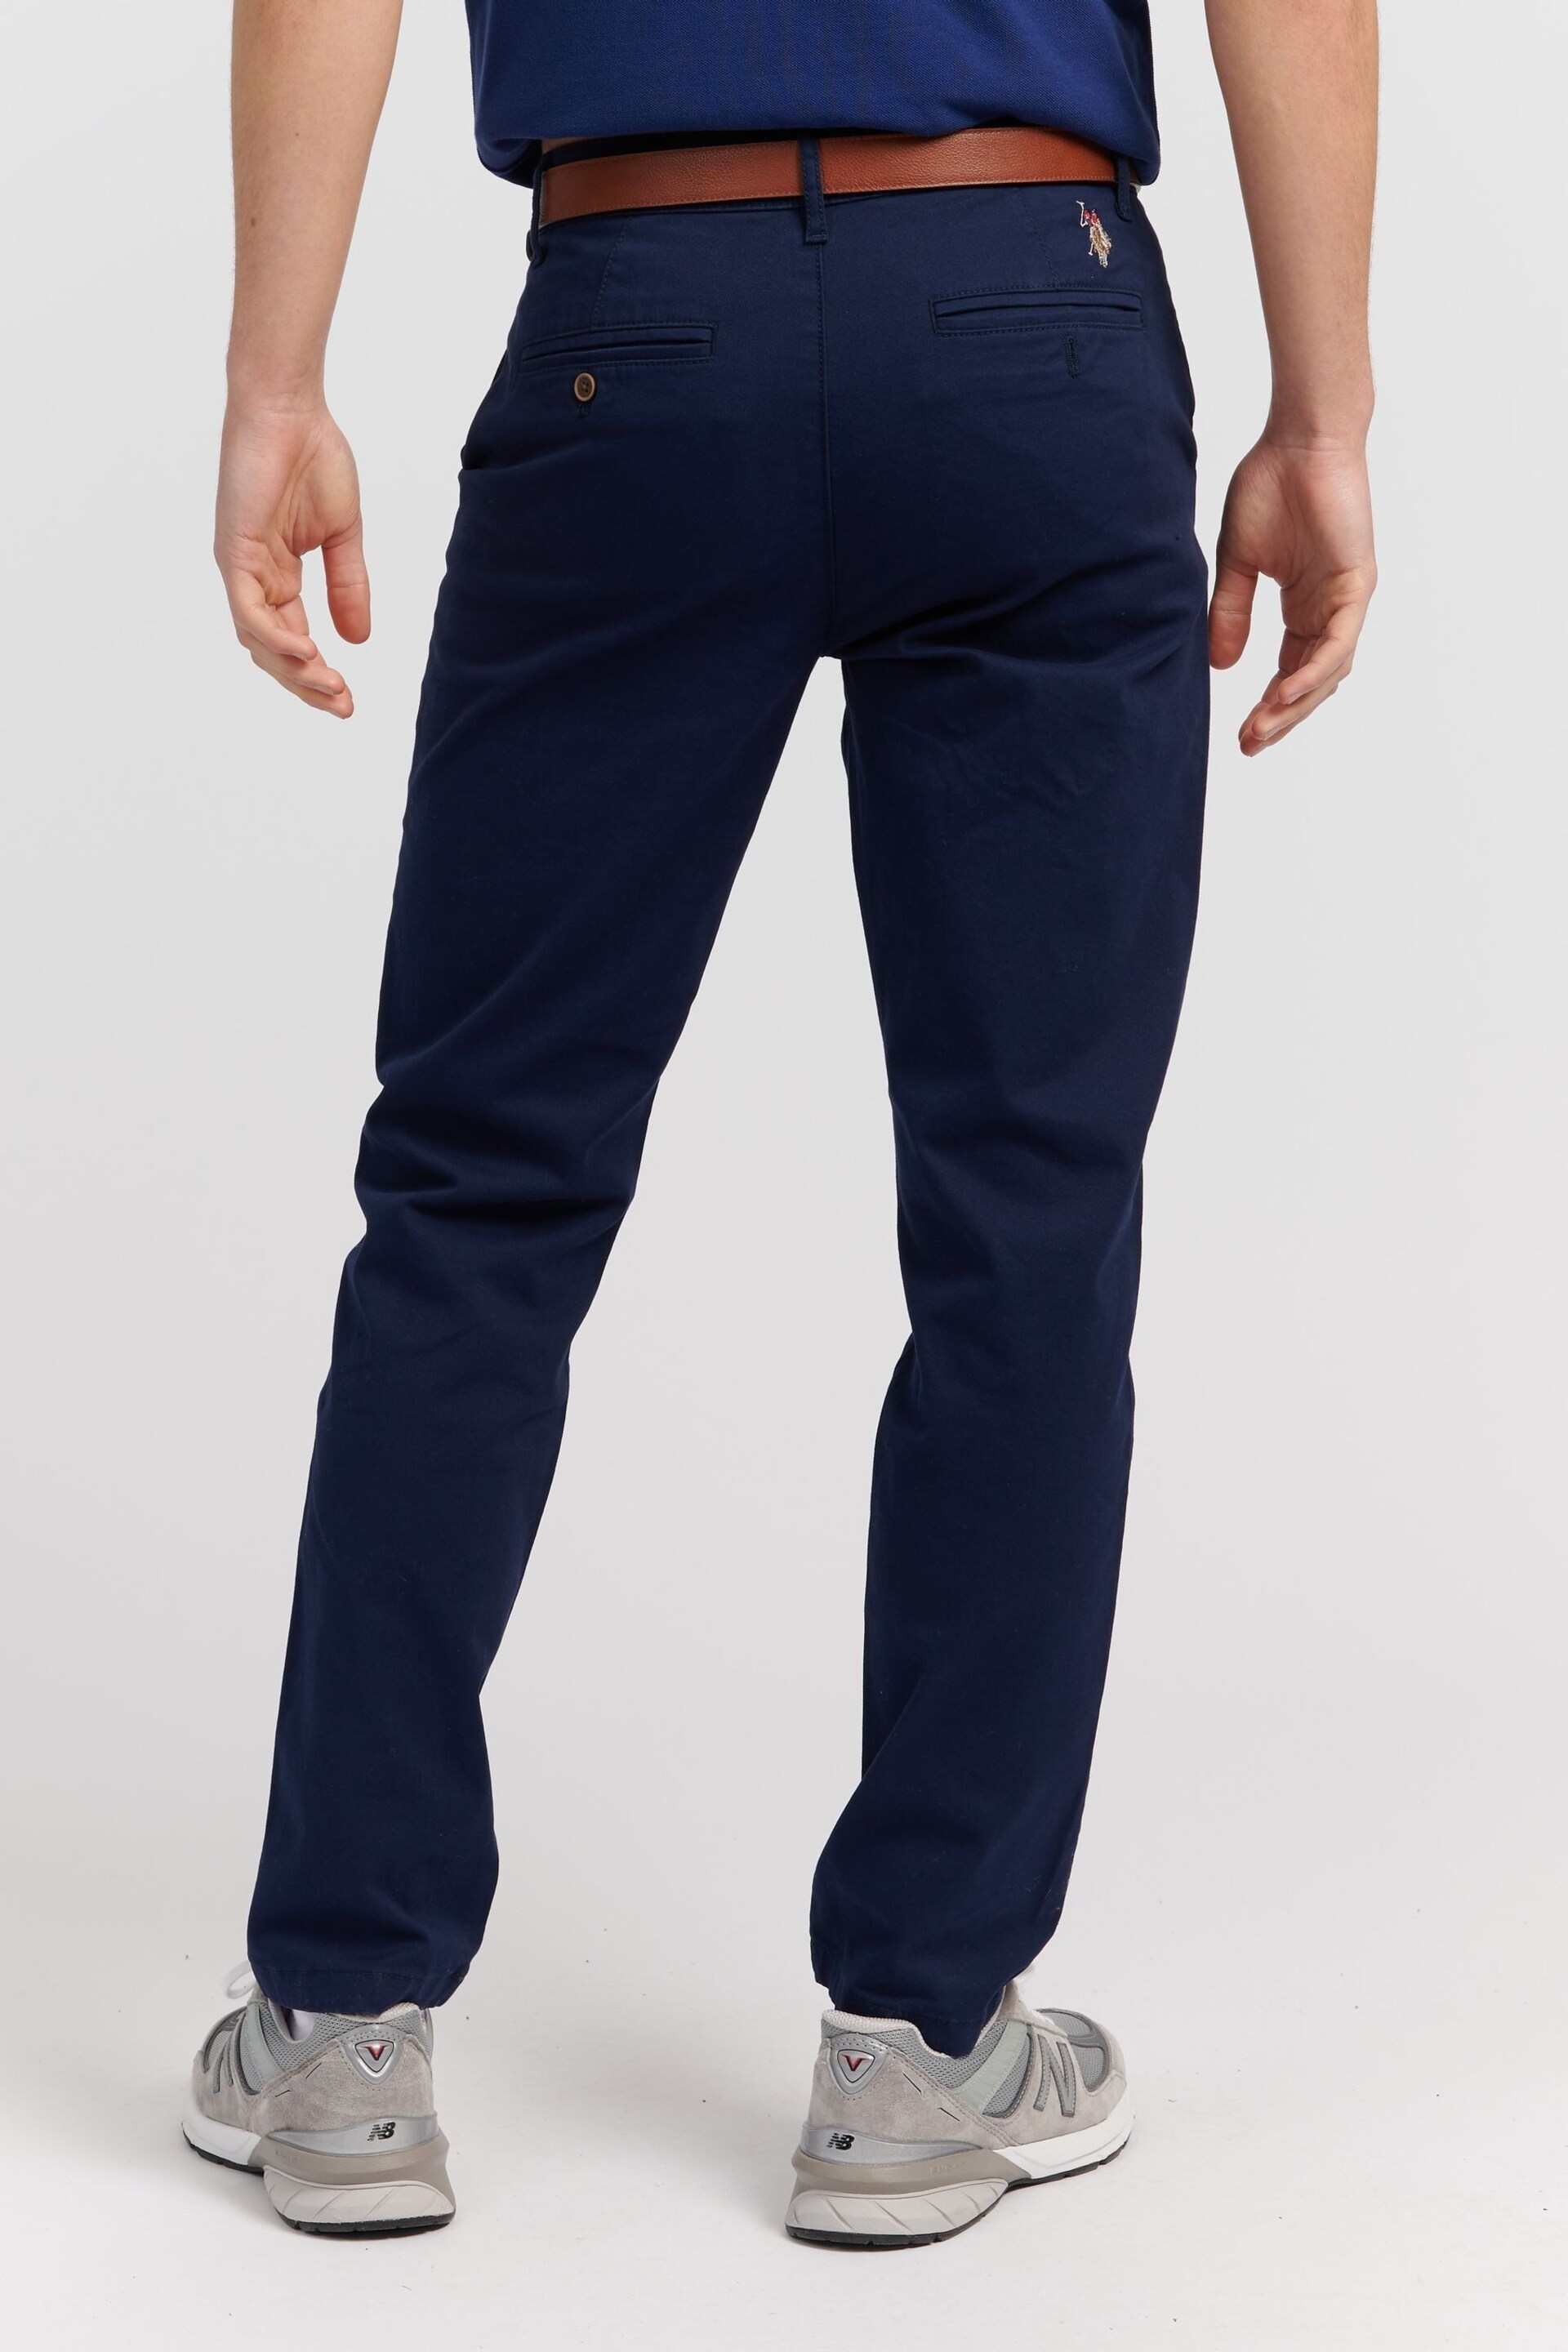 U.S. Polo Assn. Heritage Chinos - Image 2 of 5